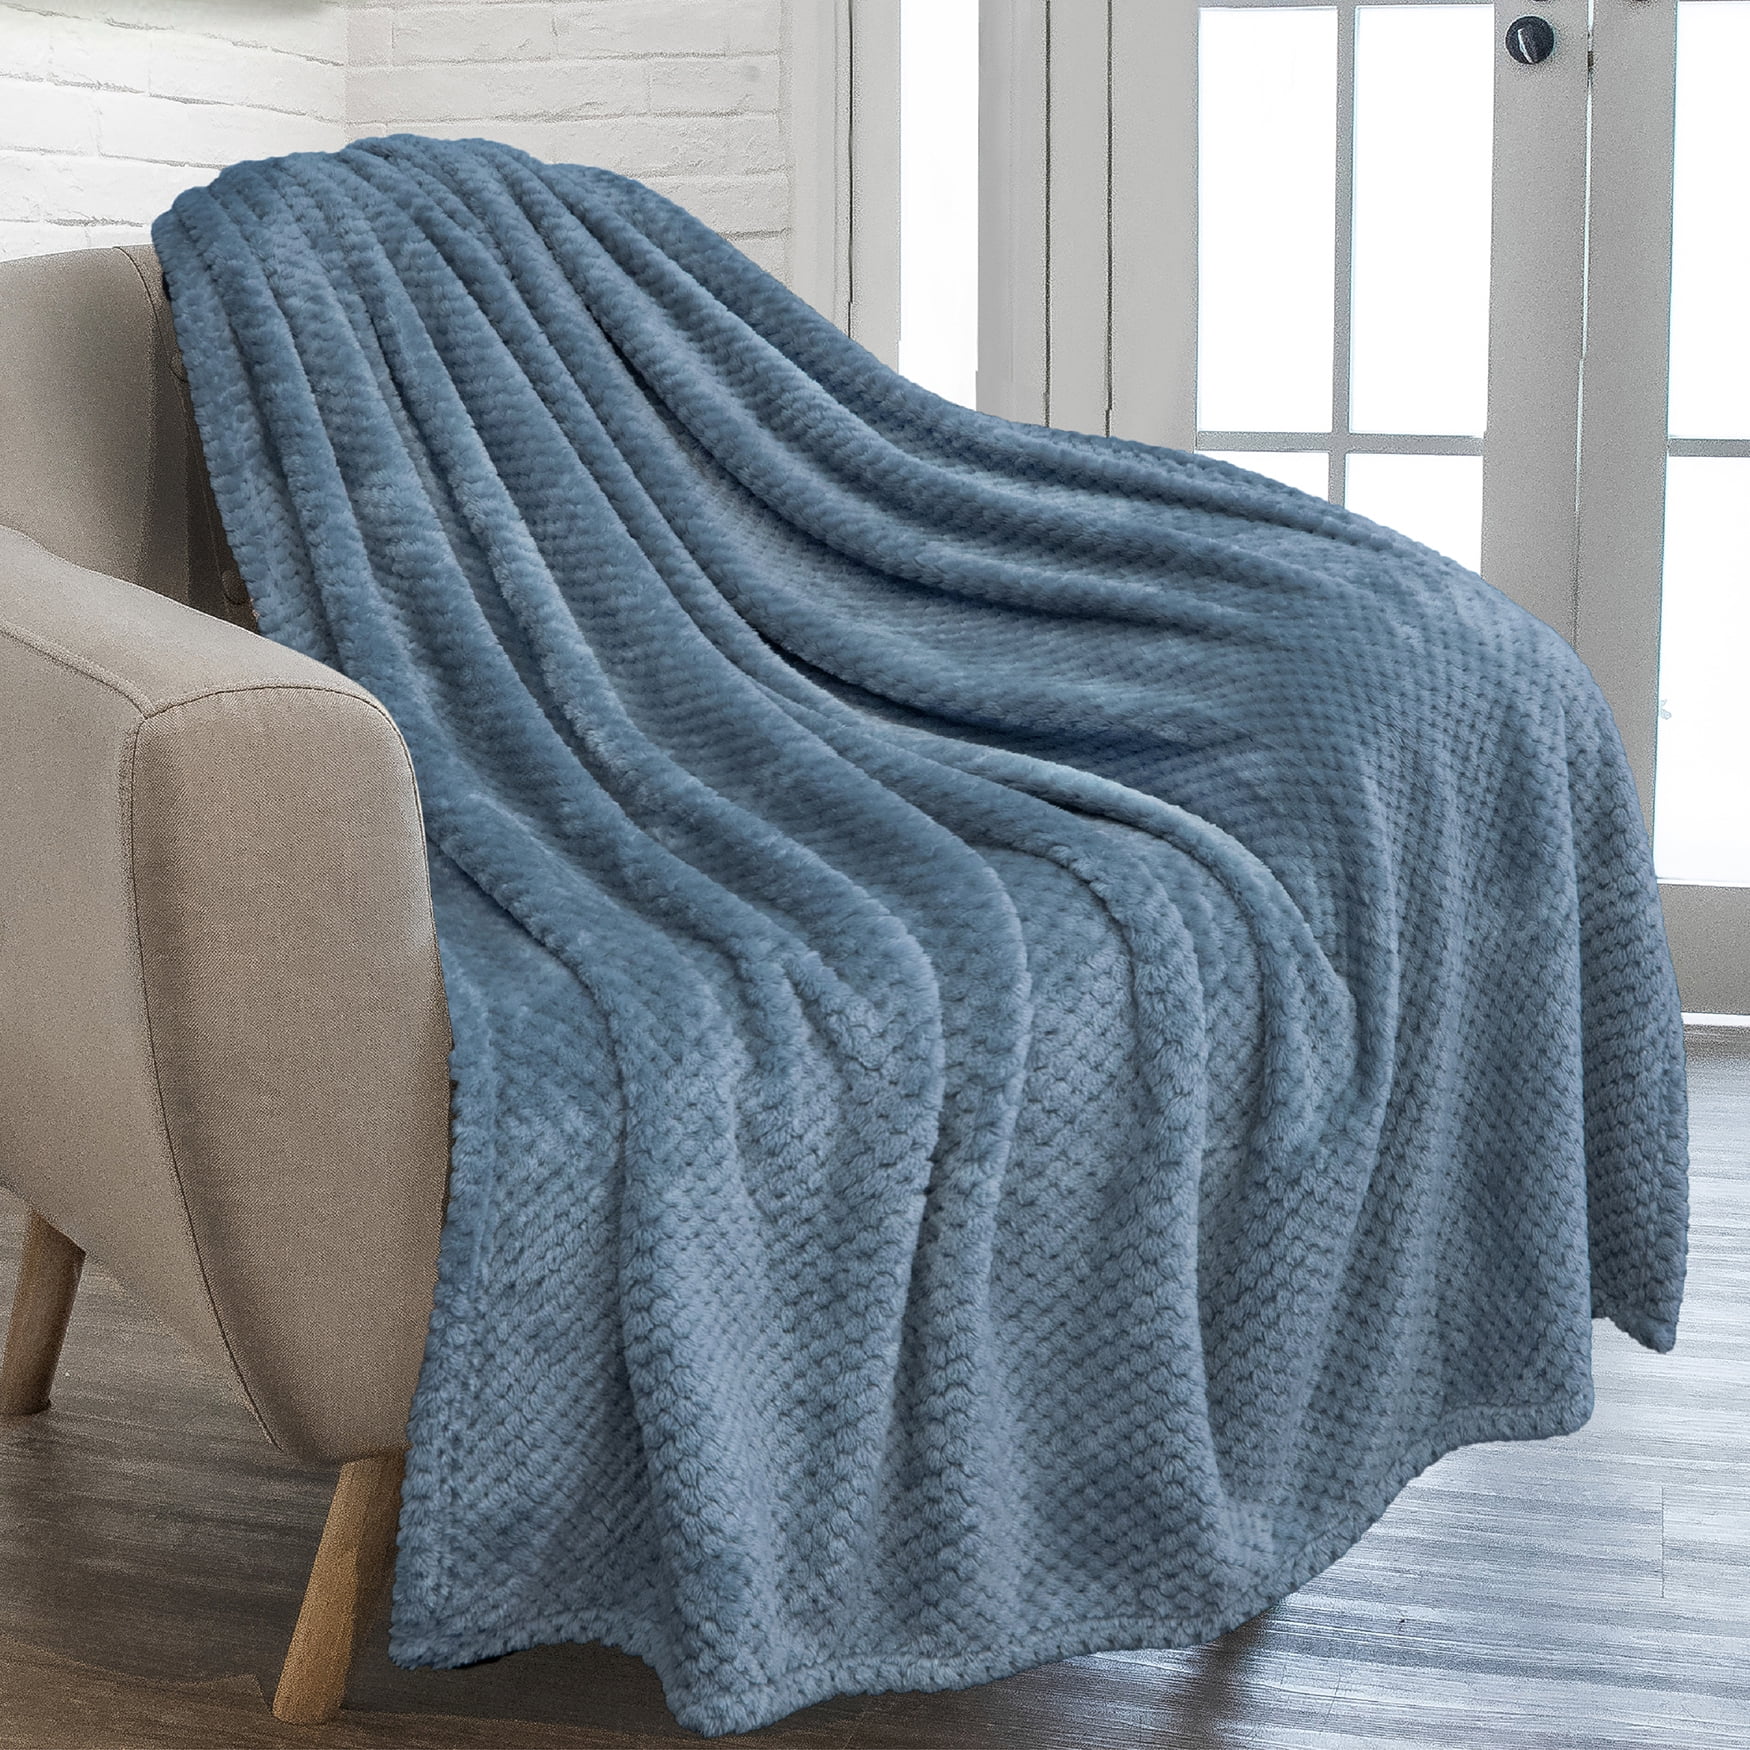 60 x 50 Inch Soft and Warm Living Room Decorative Throws for Sofa and Couch Dusty Blue Throw Blanket 